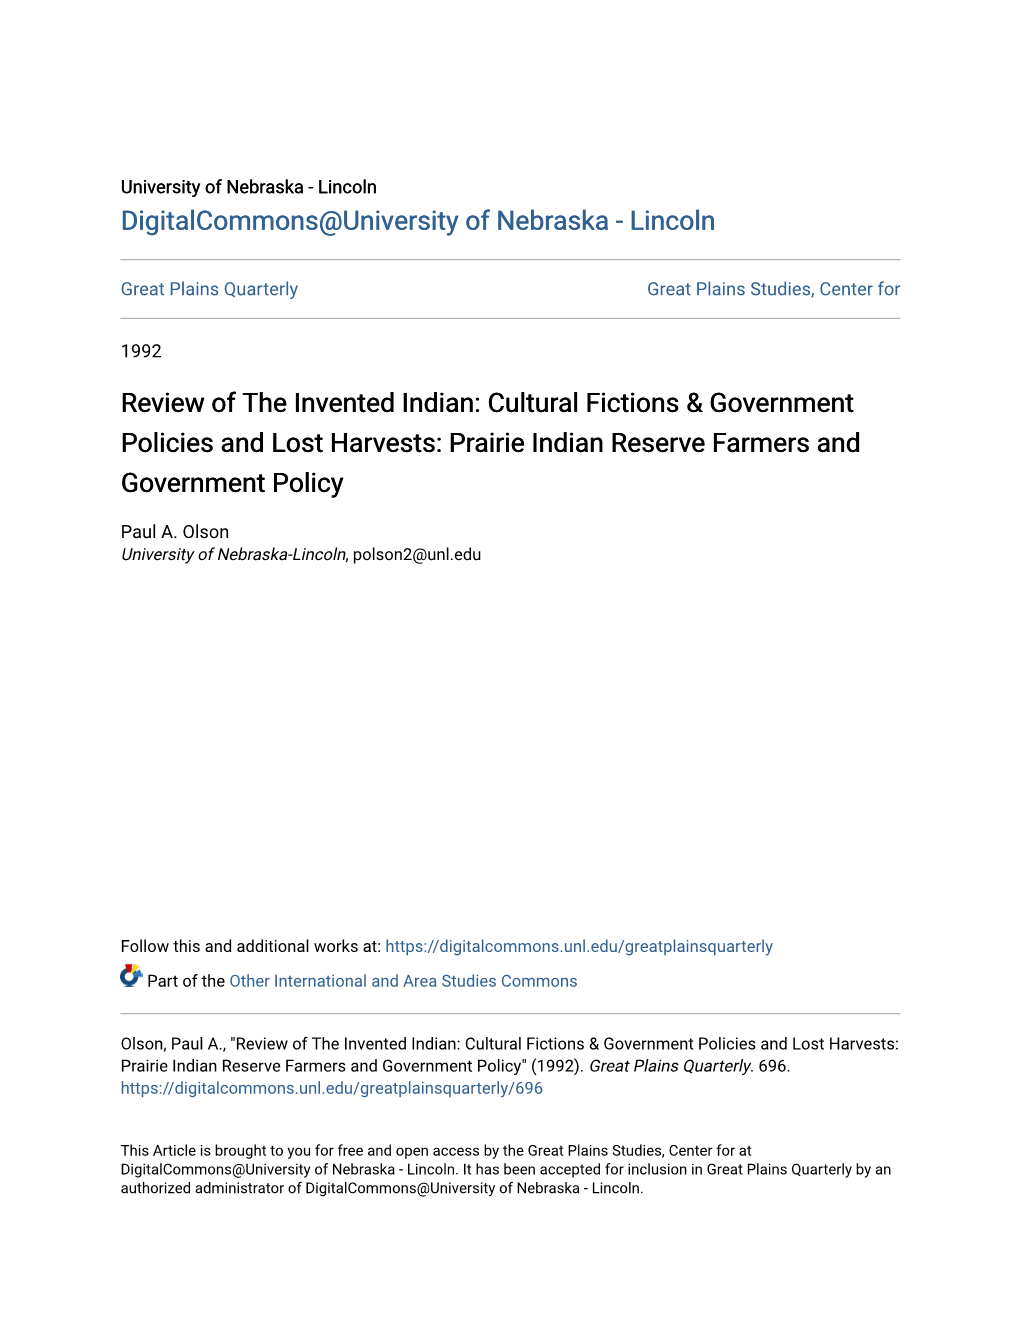 Review of the Invented Indian: Cultural Fictions & Government Policies and Lost Harvests: Prairie Indian Reserve Farmers and Government Policy